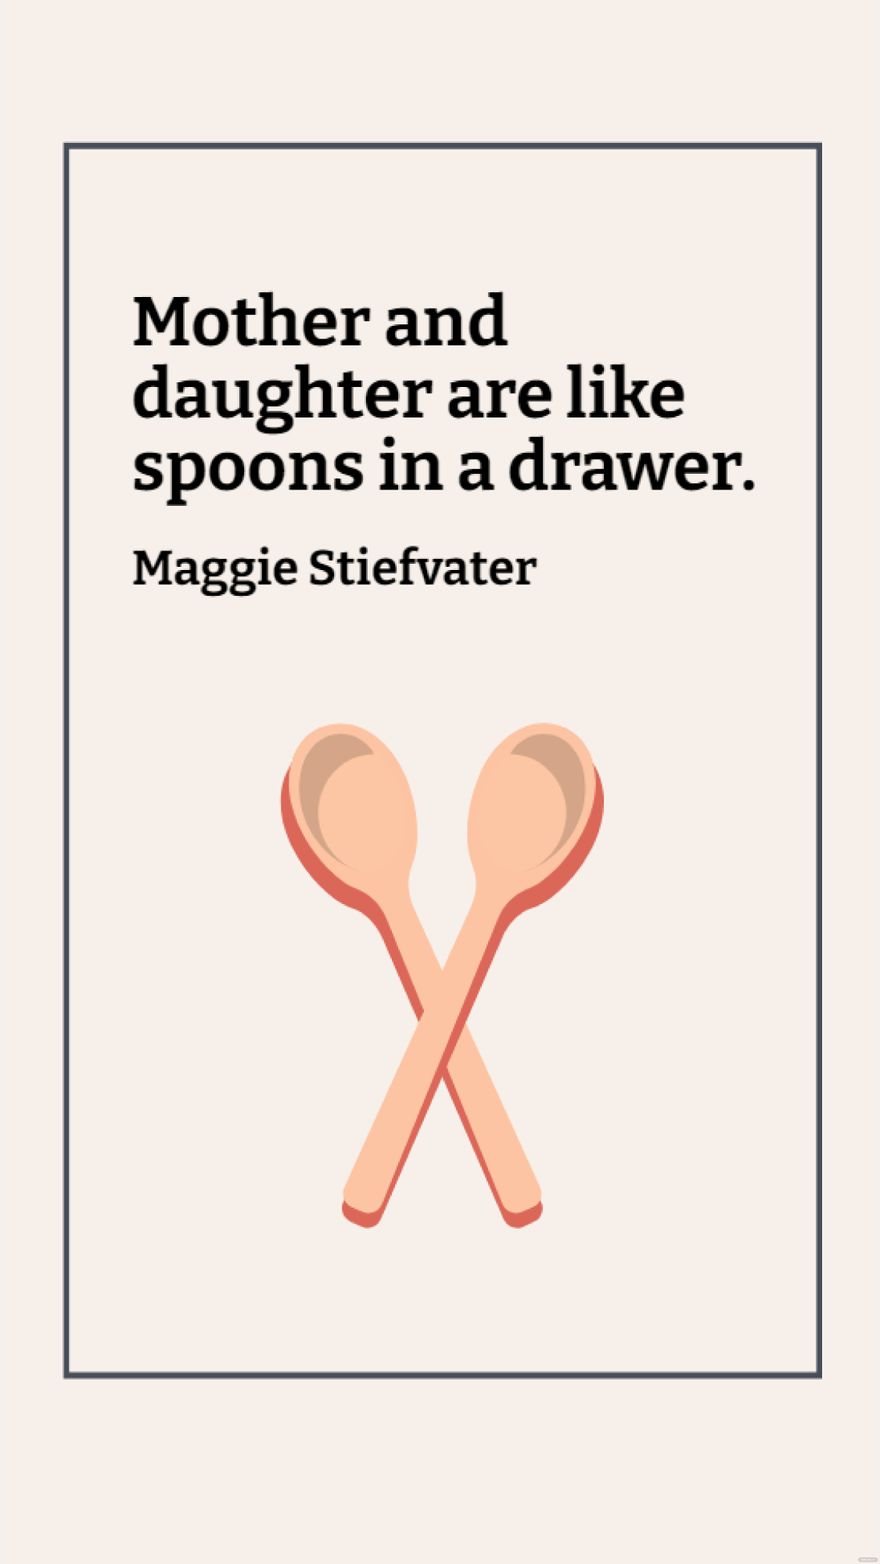 Free Maggie Stiefvater - Mother and daughter are like spoons in a drawer. in JPG